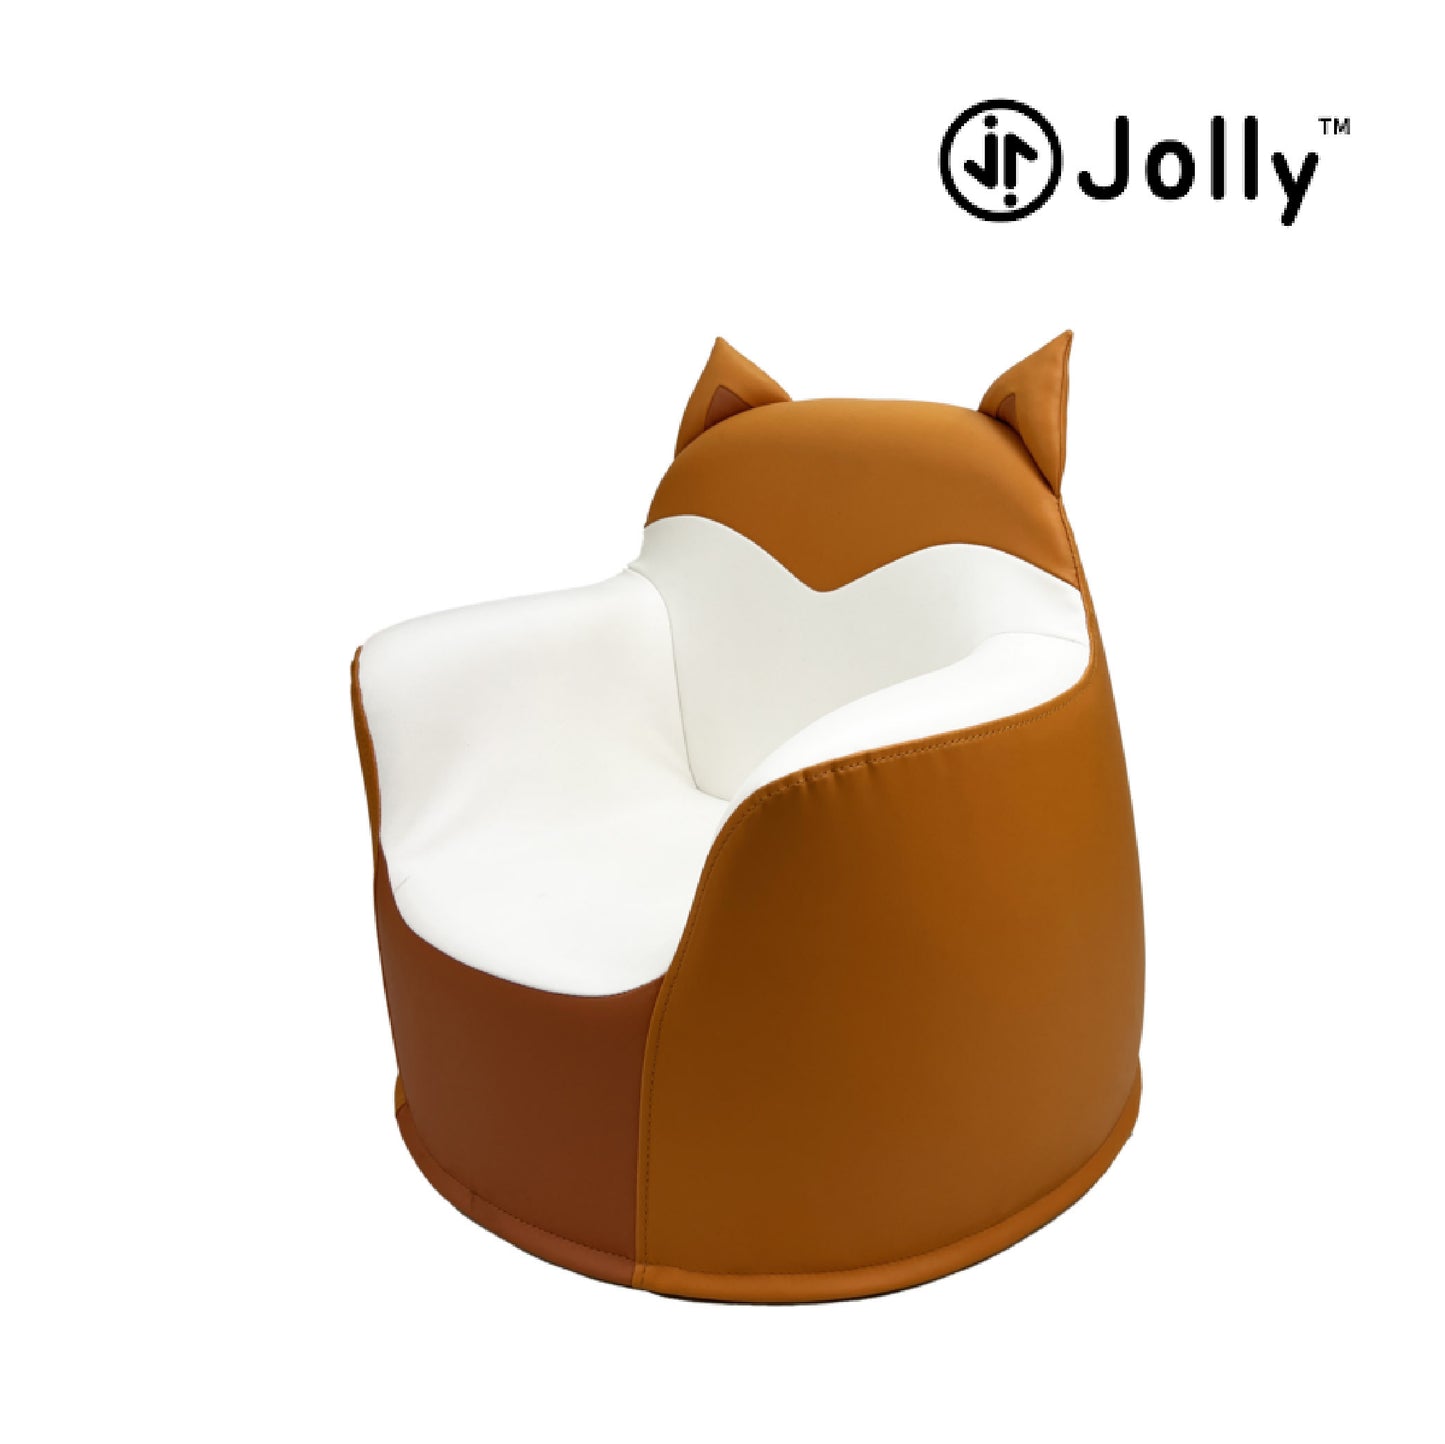 [Jolly UK] Animal Shape Sofa – 5 types to choose from